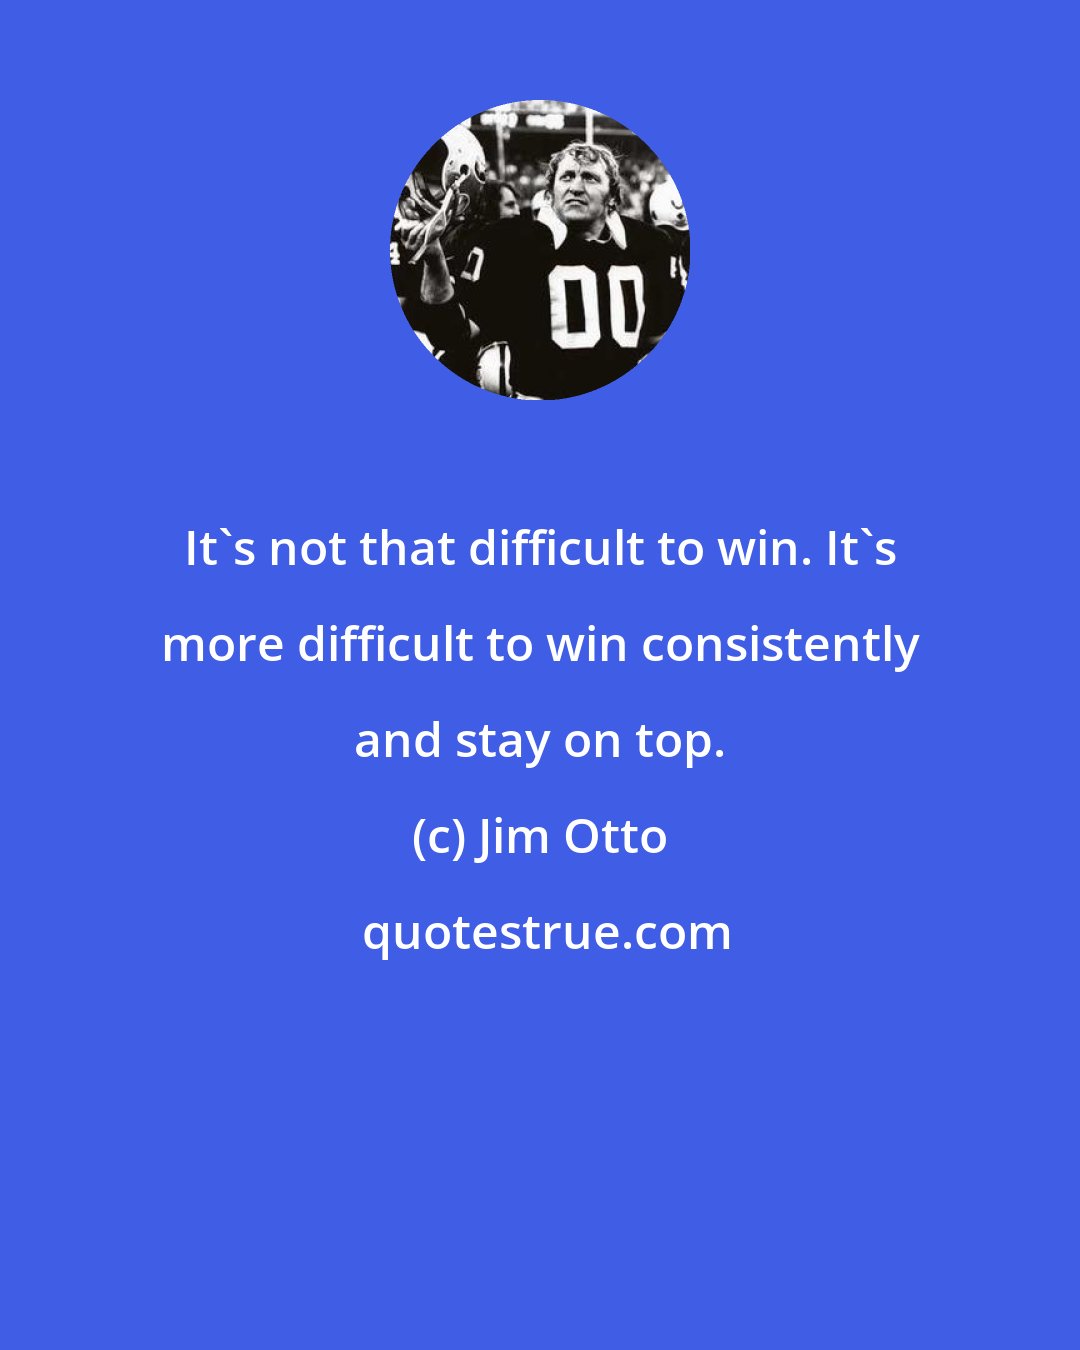 Jim Otto: It's not that difficult to win. It's more difficult to win consistently and stay on top.